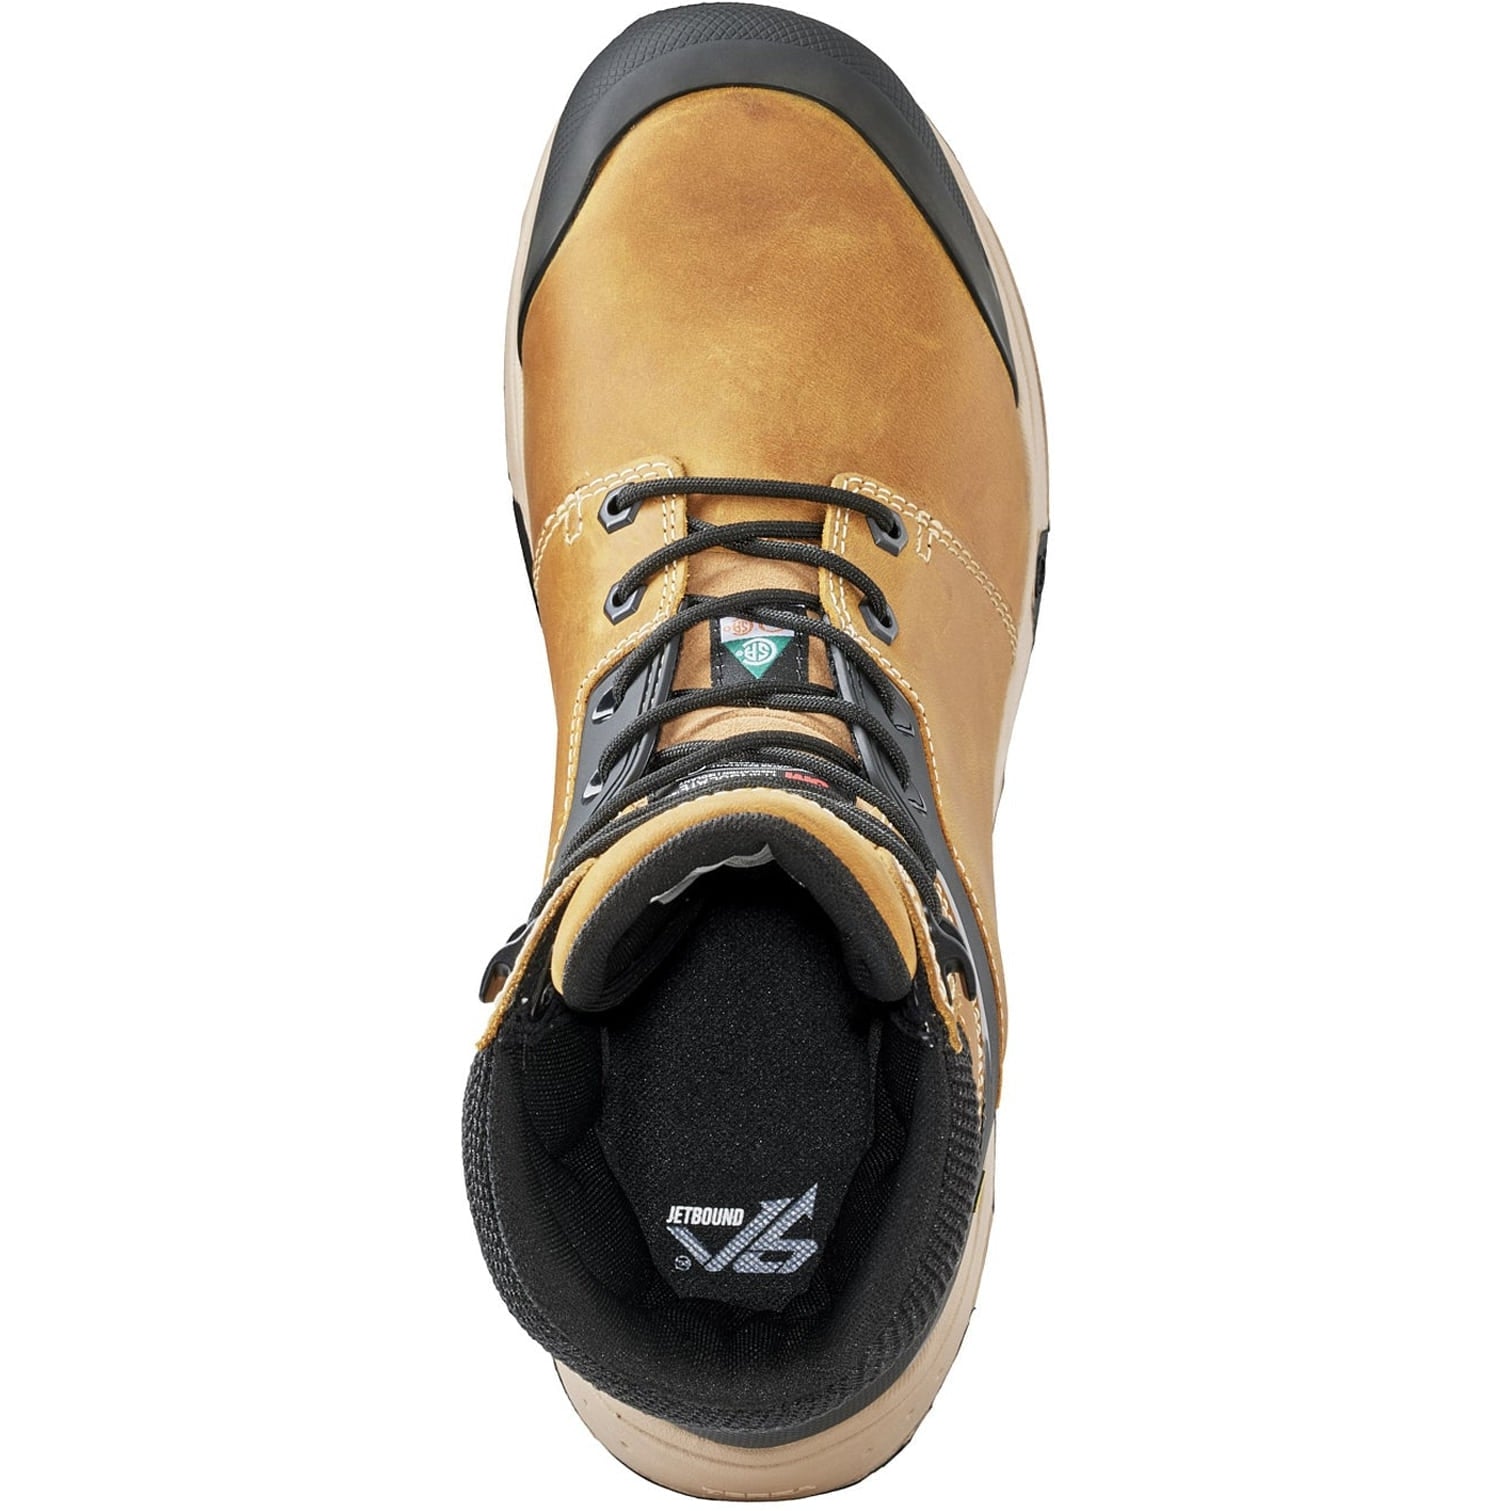 Terra Men's Carbine 8" Comp Toe WP Safety  Work Boot -Wheat- 4TCRWT  - Overlook Boots